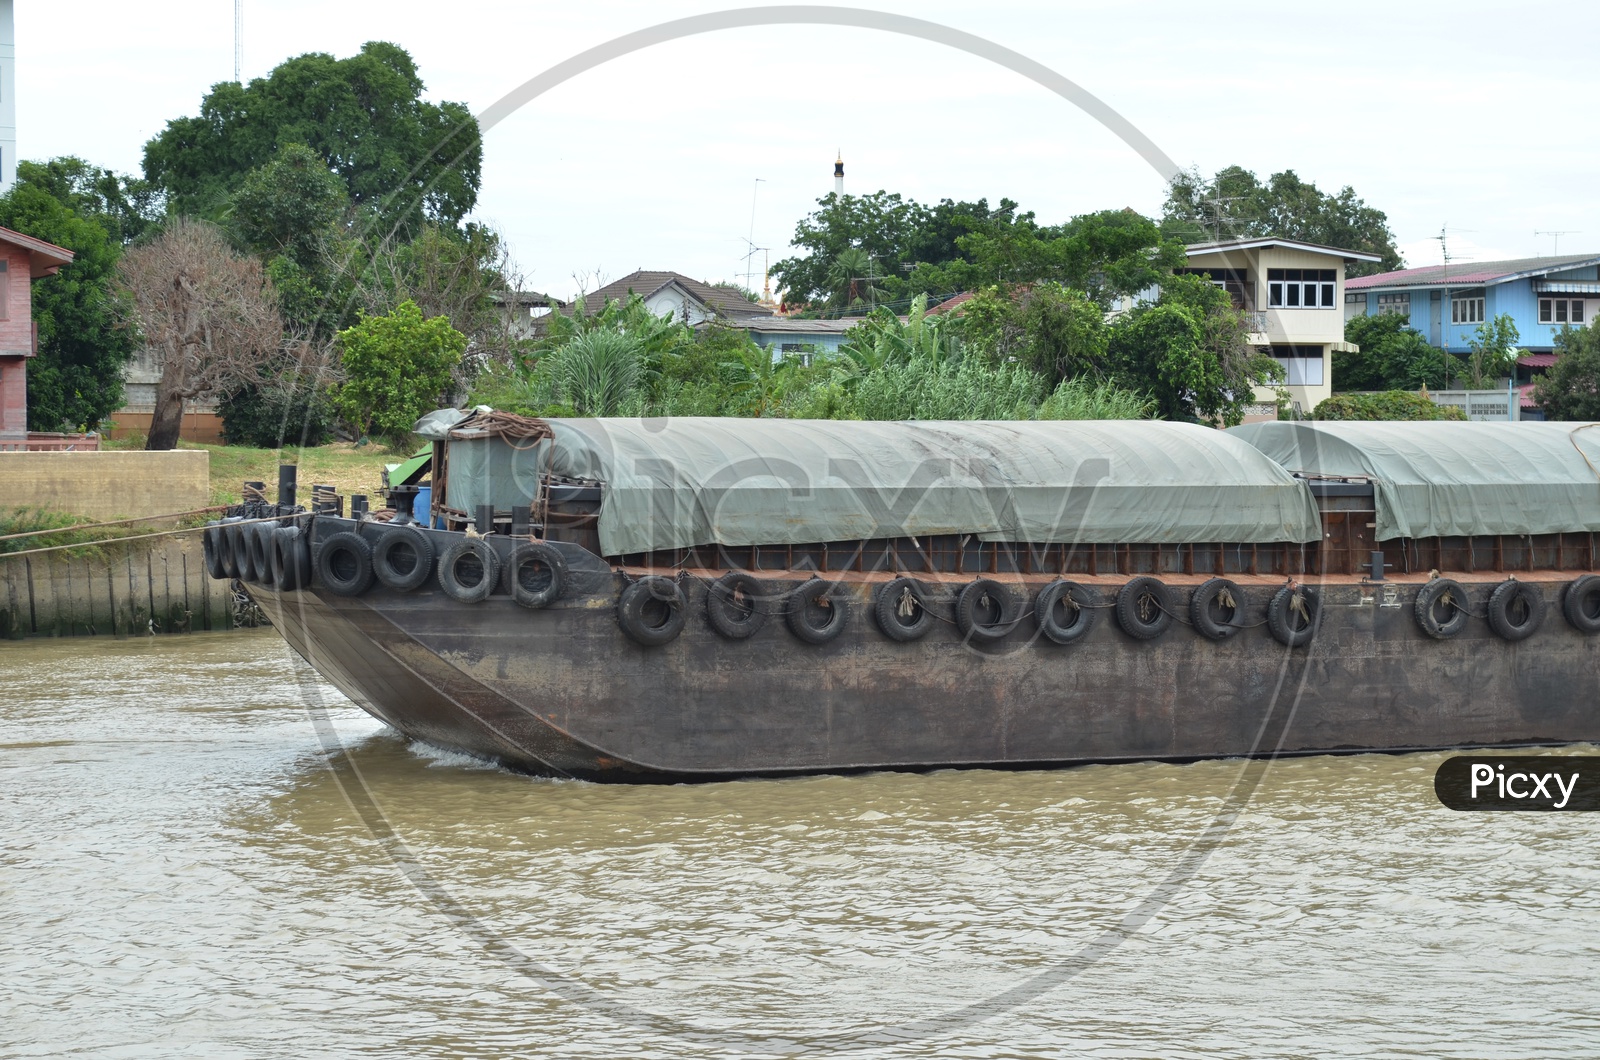 A Thai Cargo ship moving on the river